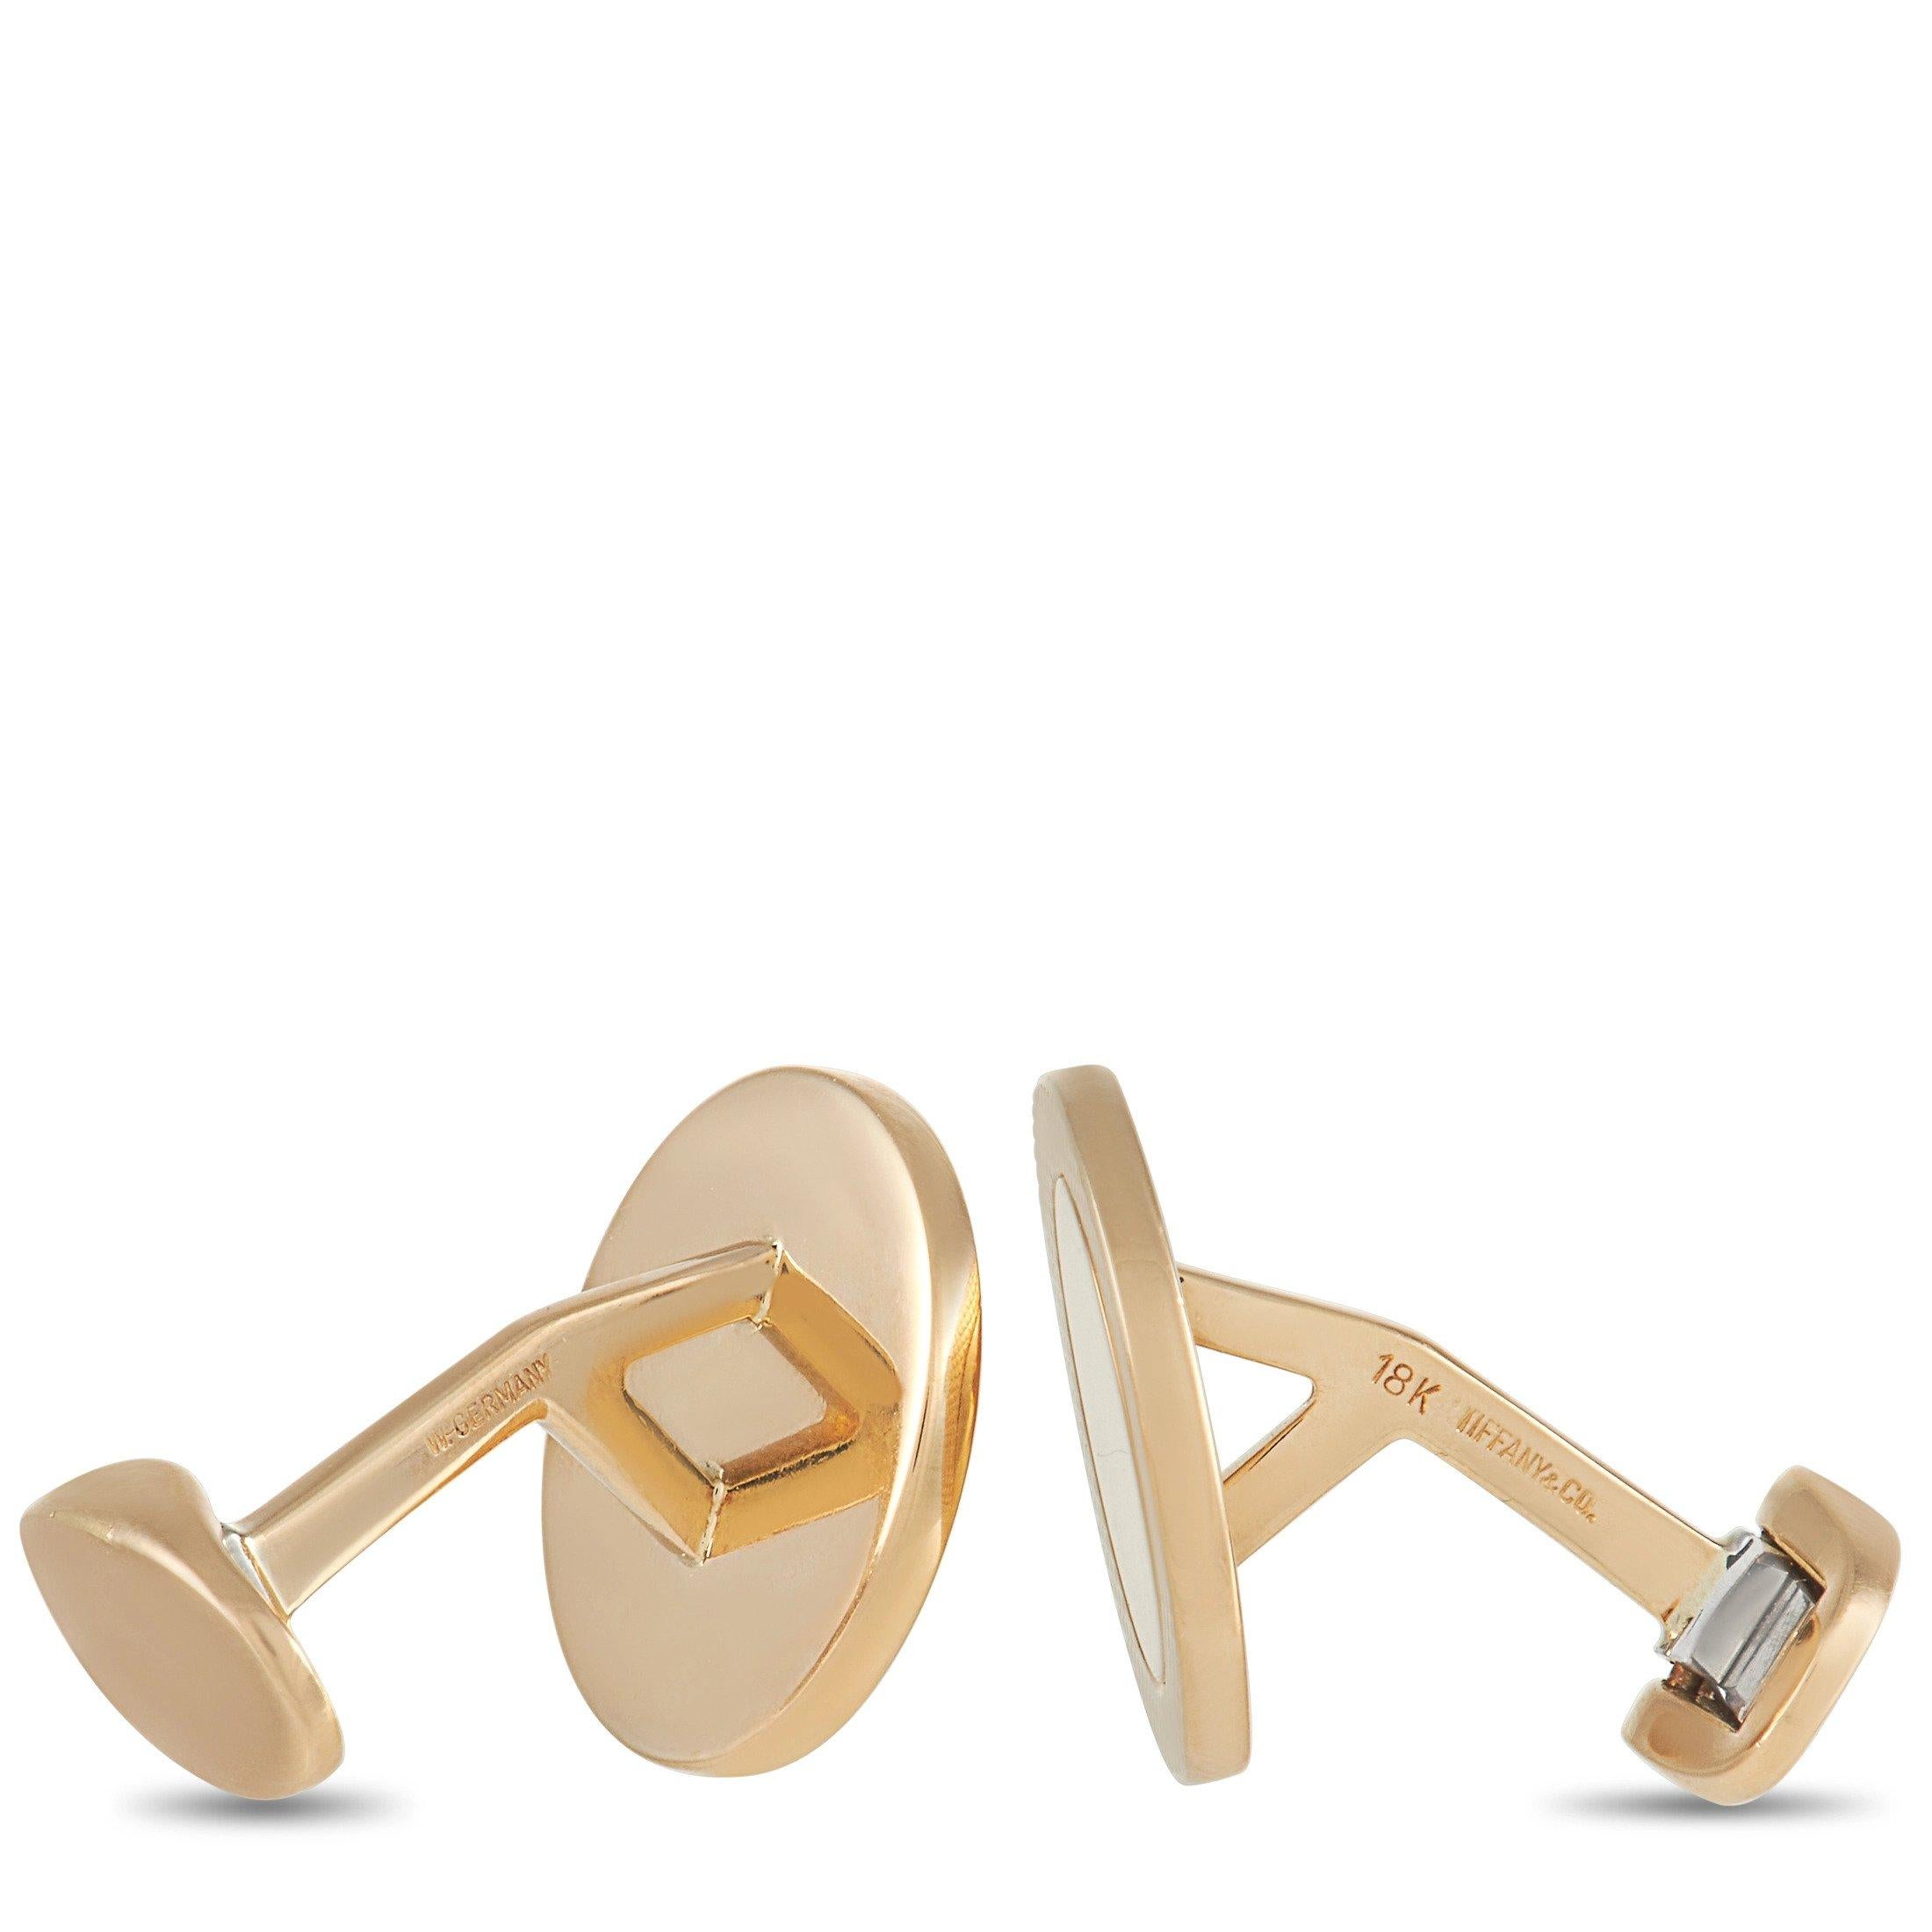 These sleek Tiffany & Co. 18K Yellow Gold Cufflinks are sure to impress. The cufflinks are made with 18K yellow gold, with a subtle texture around the edges. The cufflinks measure 0.75 inches around, with each weighing 11.2 grams for a total weight